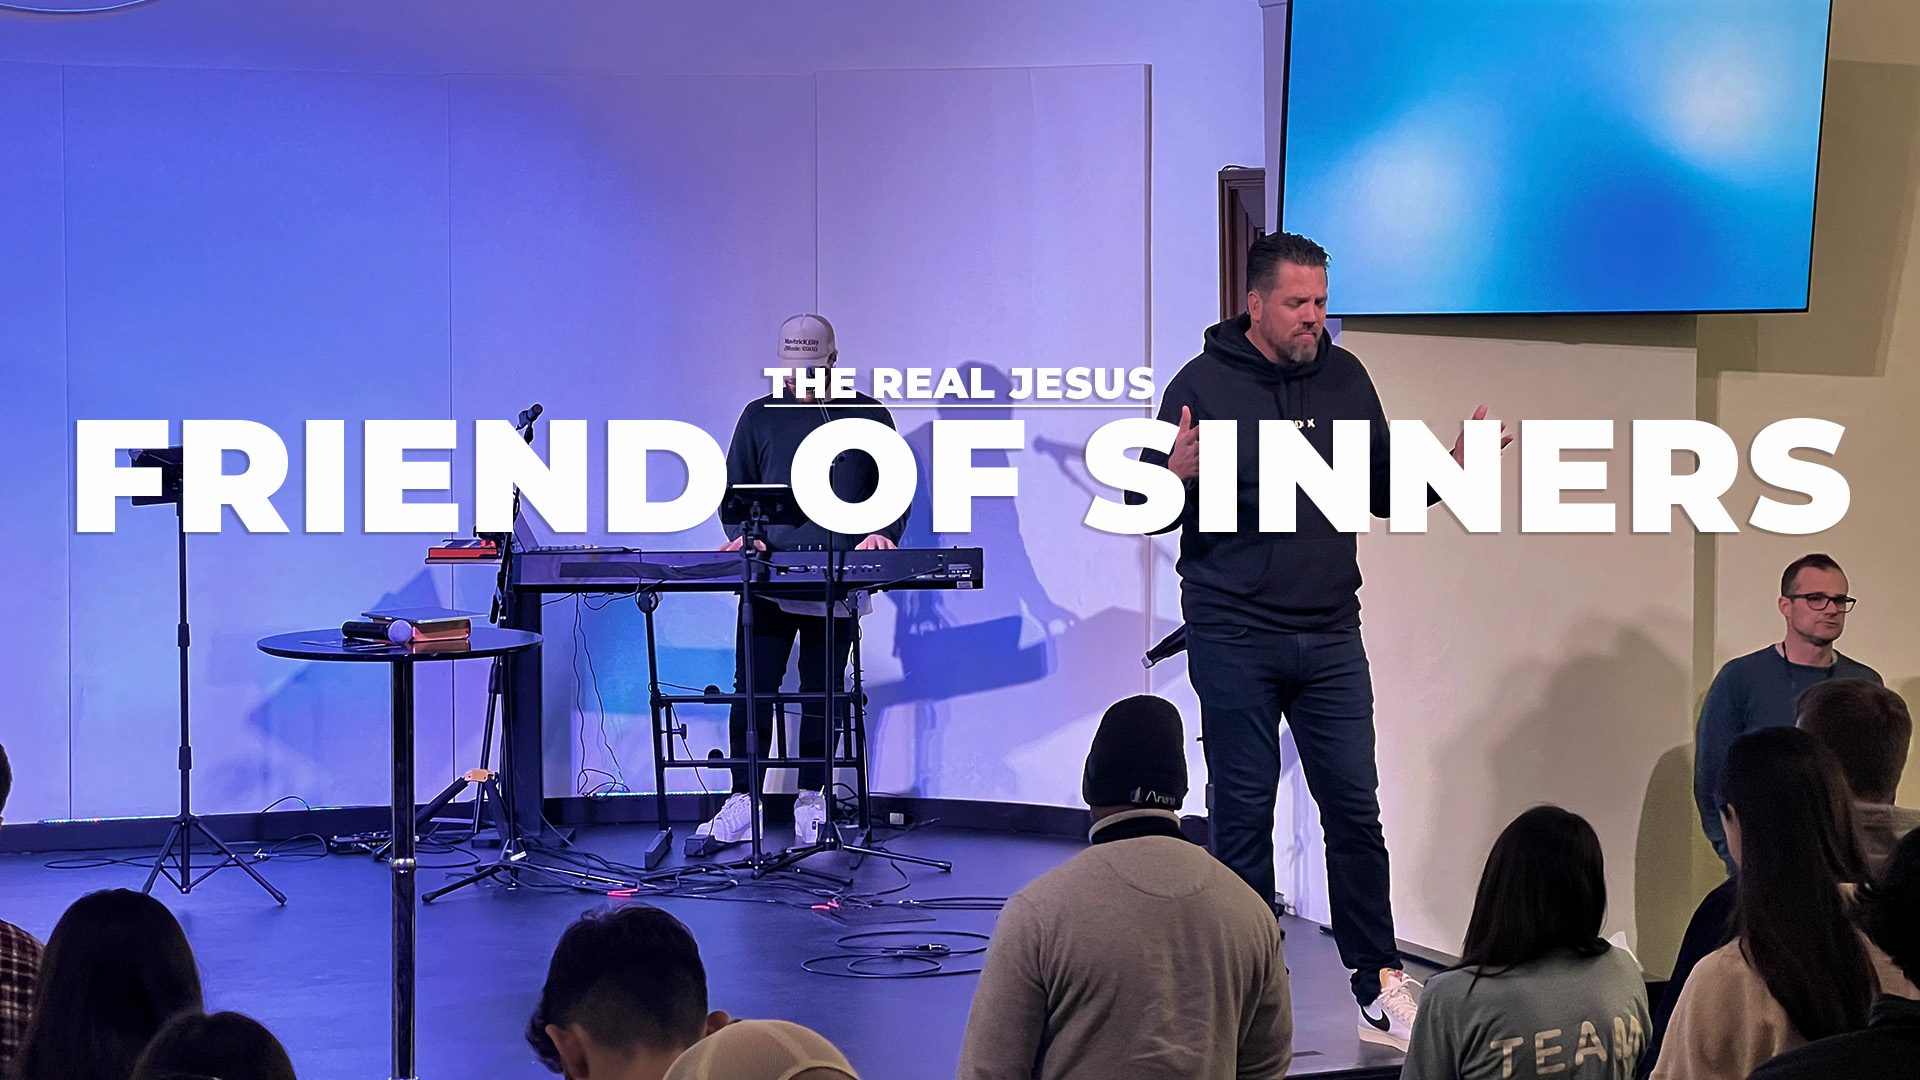 The Real Jesus: Friend of Sinners